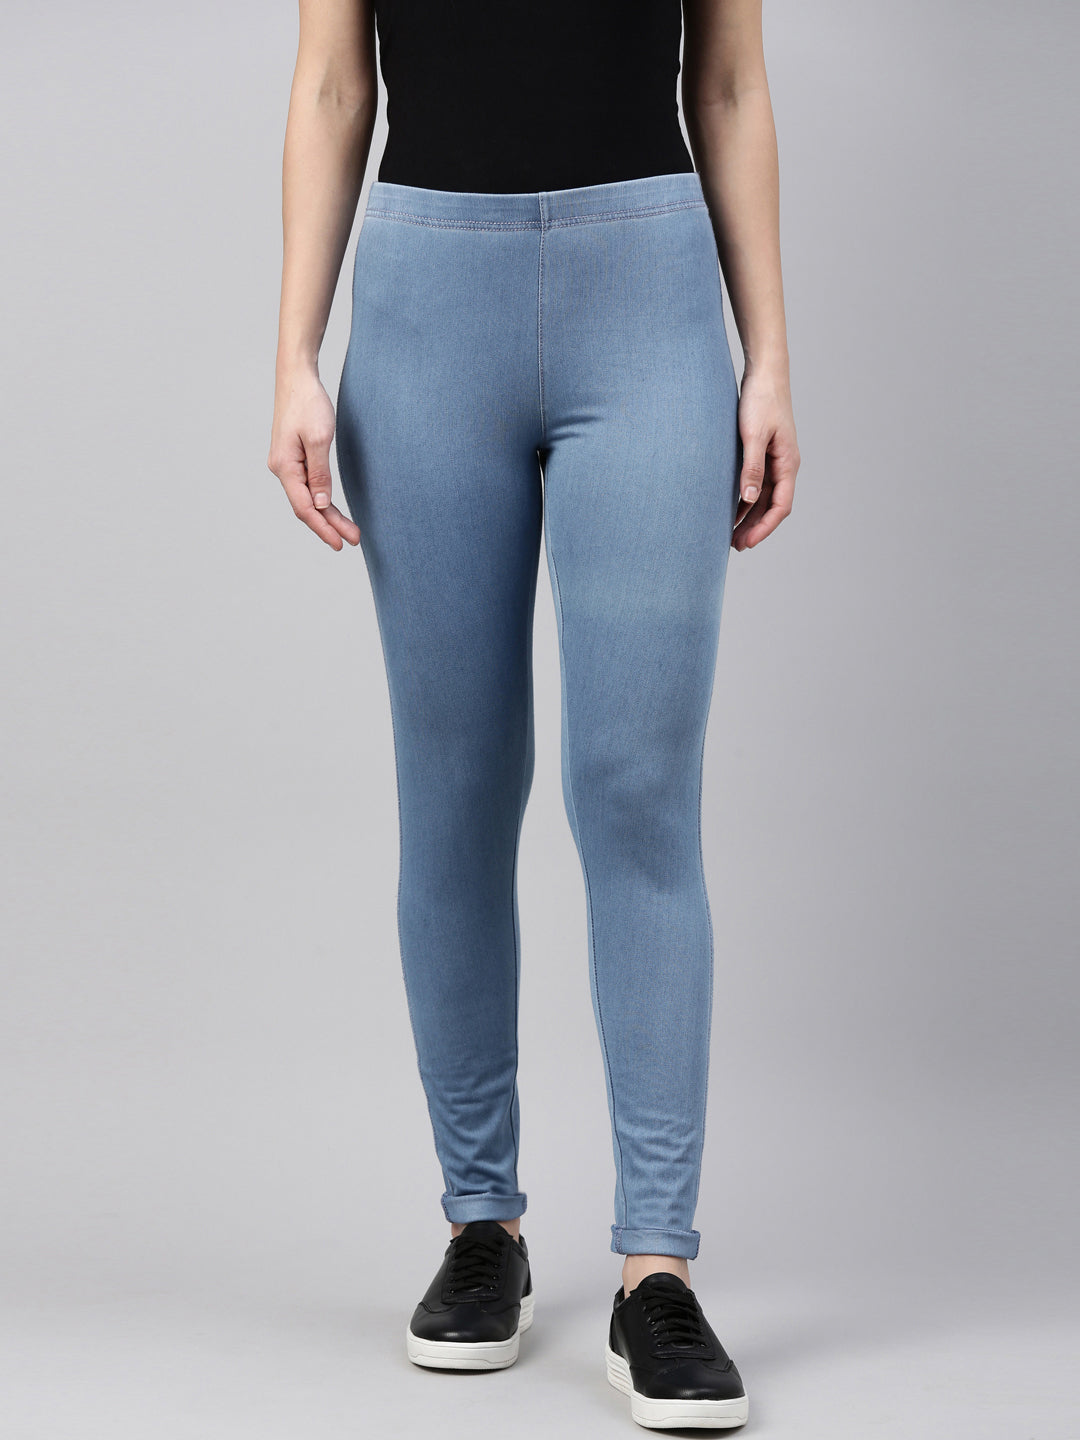 15 Best Comfortable Yoga Pants That Look Like Jeans